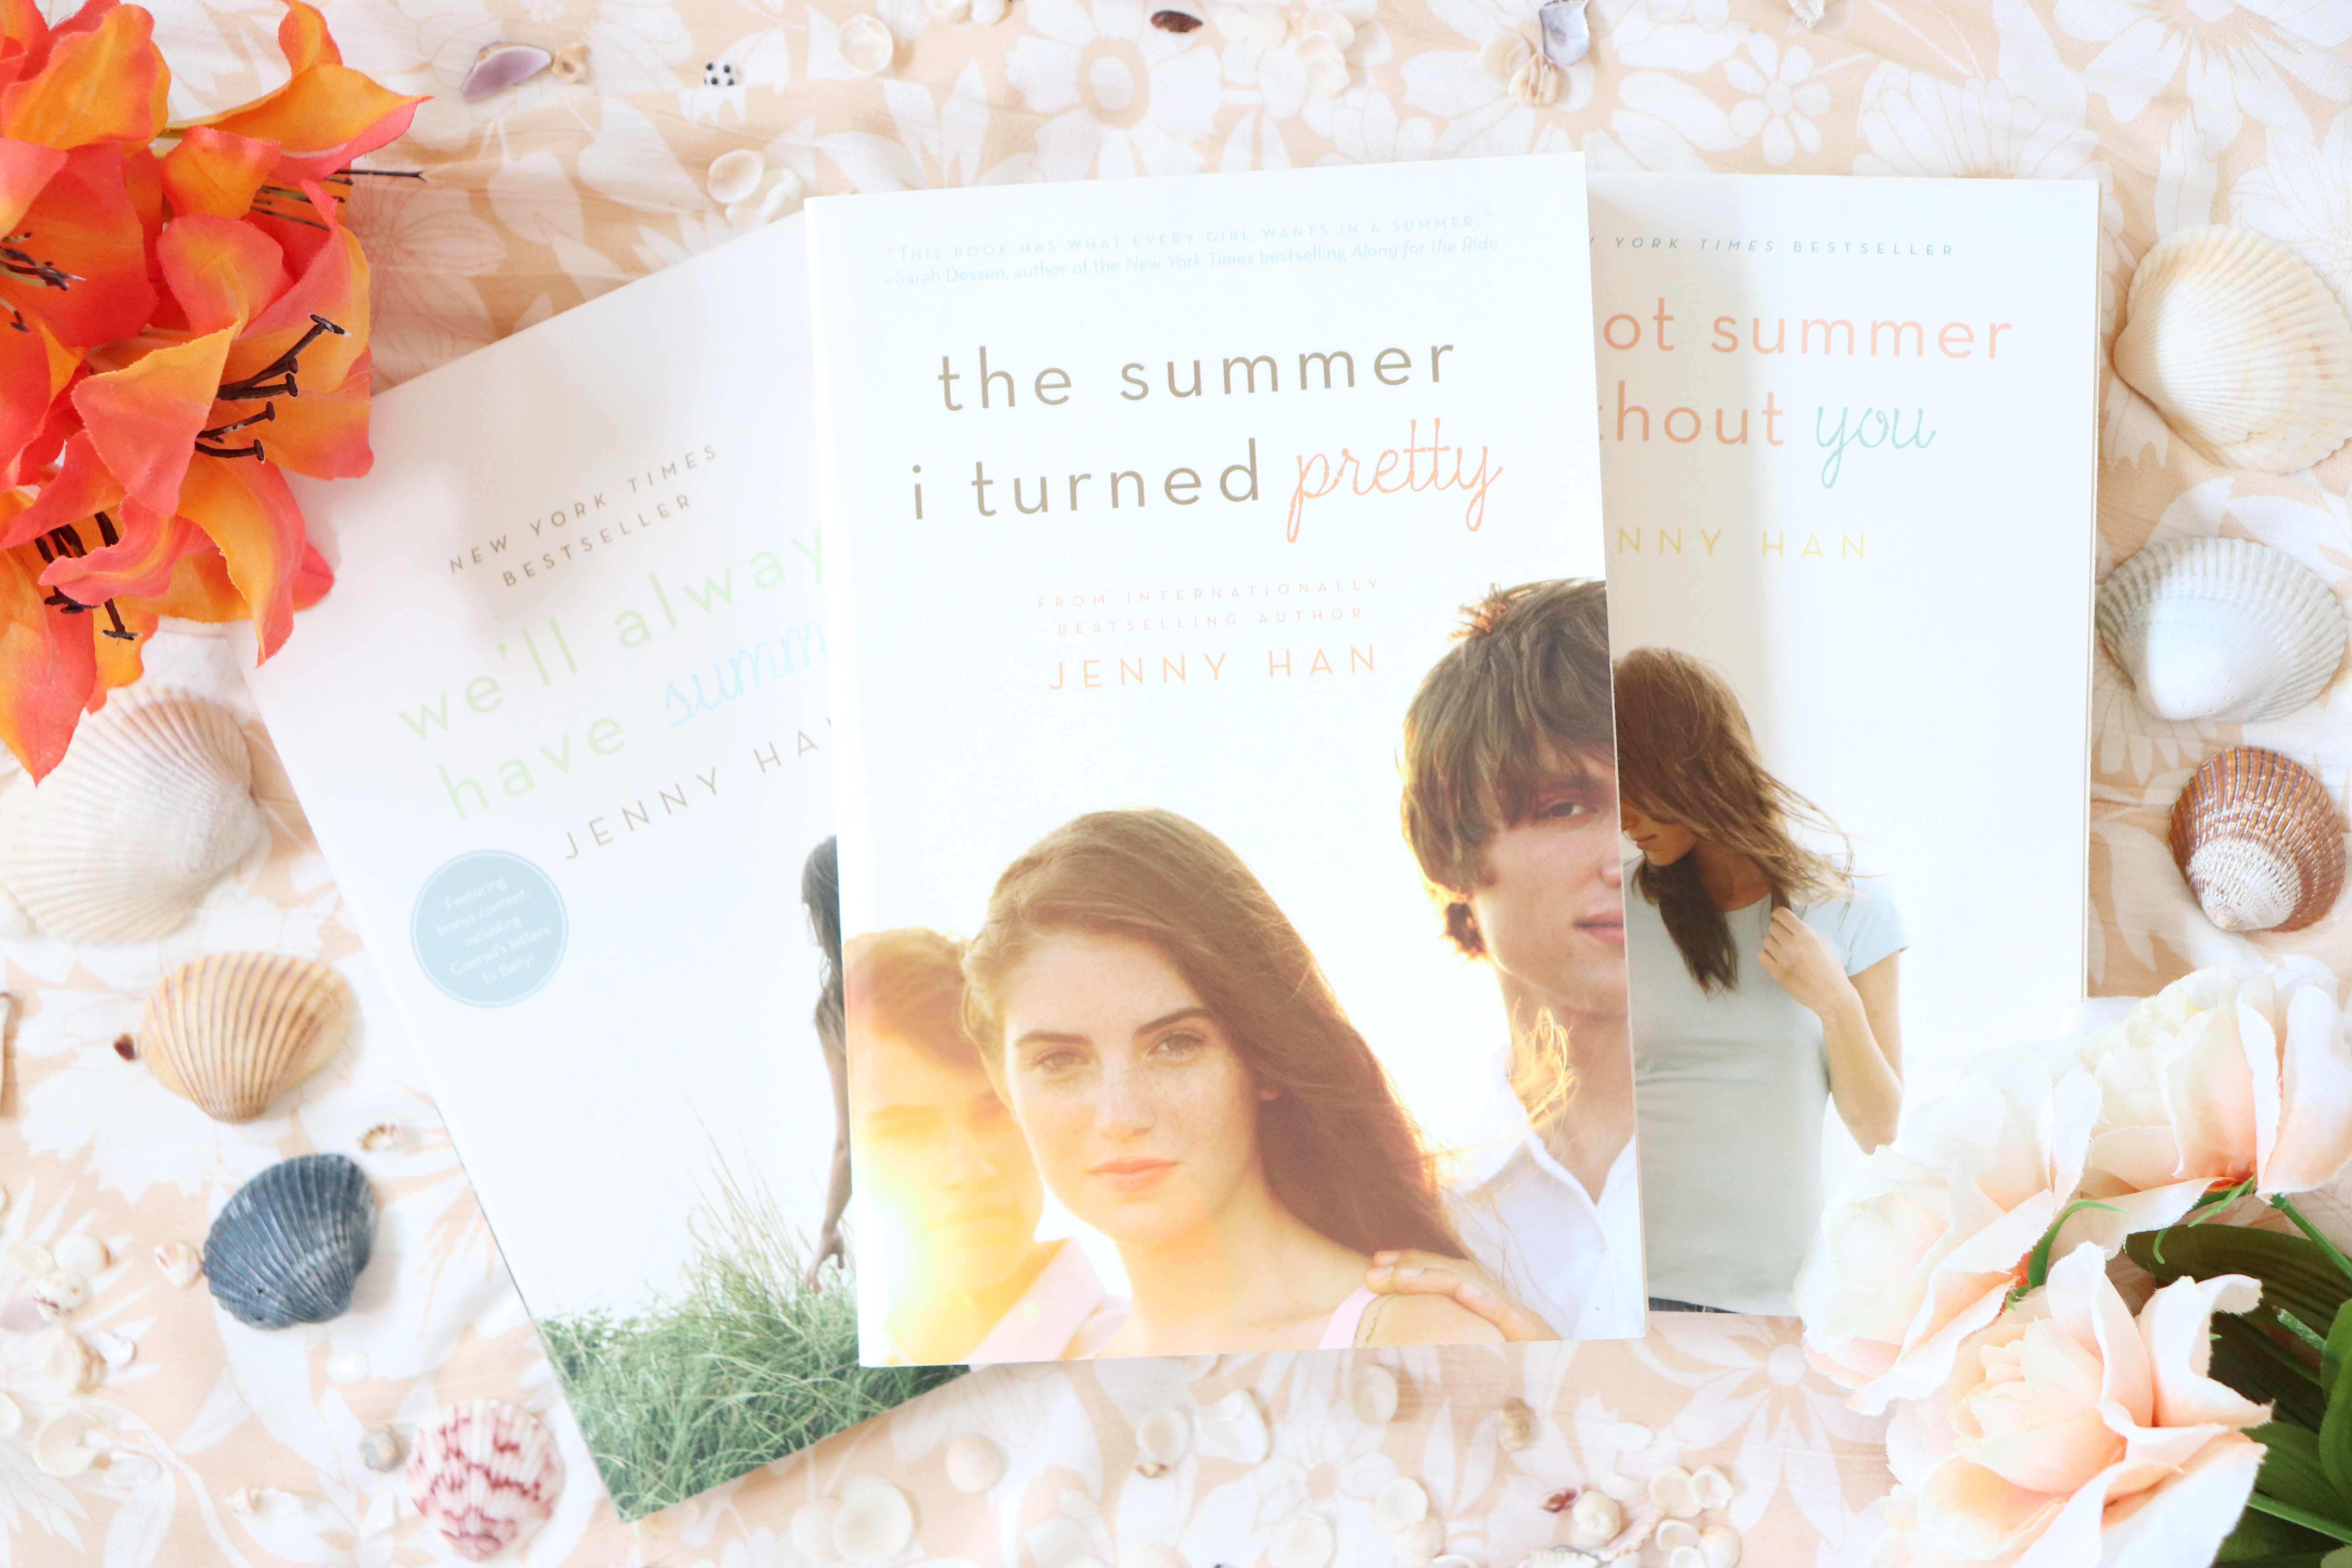 The Summer I Turned Pretty Review: A Feel-Good Tale About Love